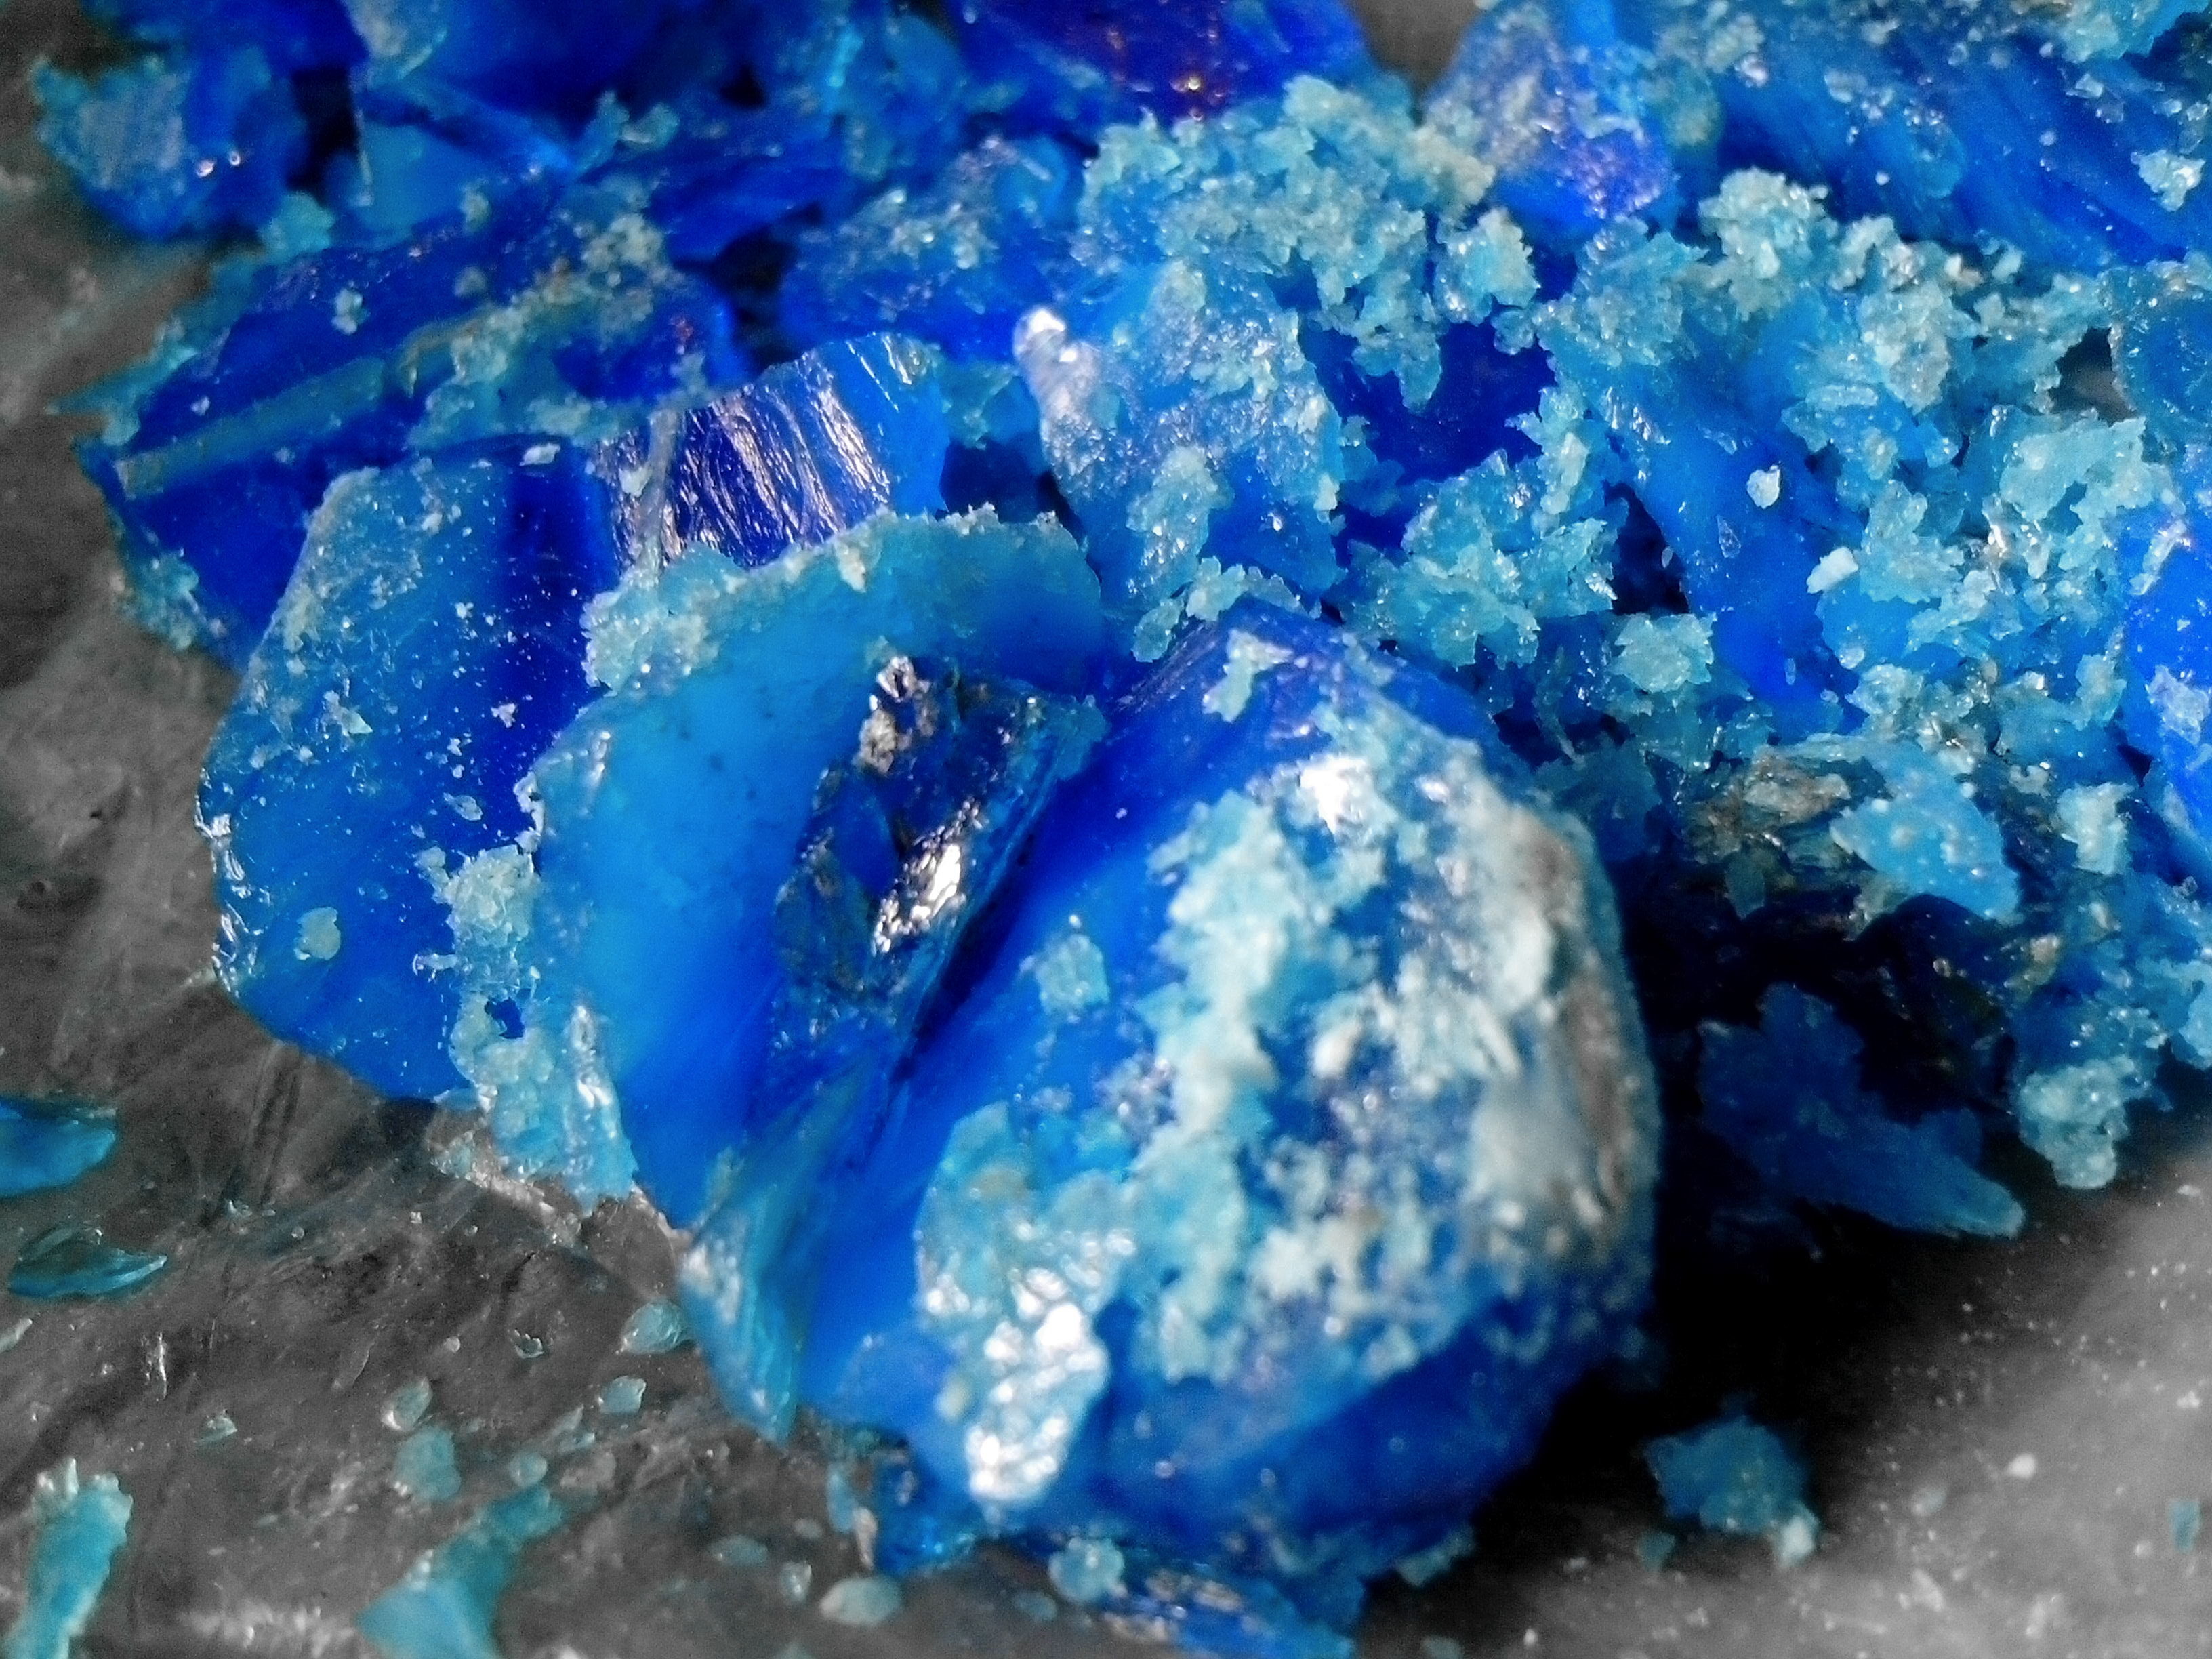 Free picture: blue, stone, crystal